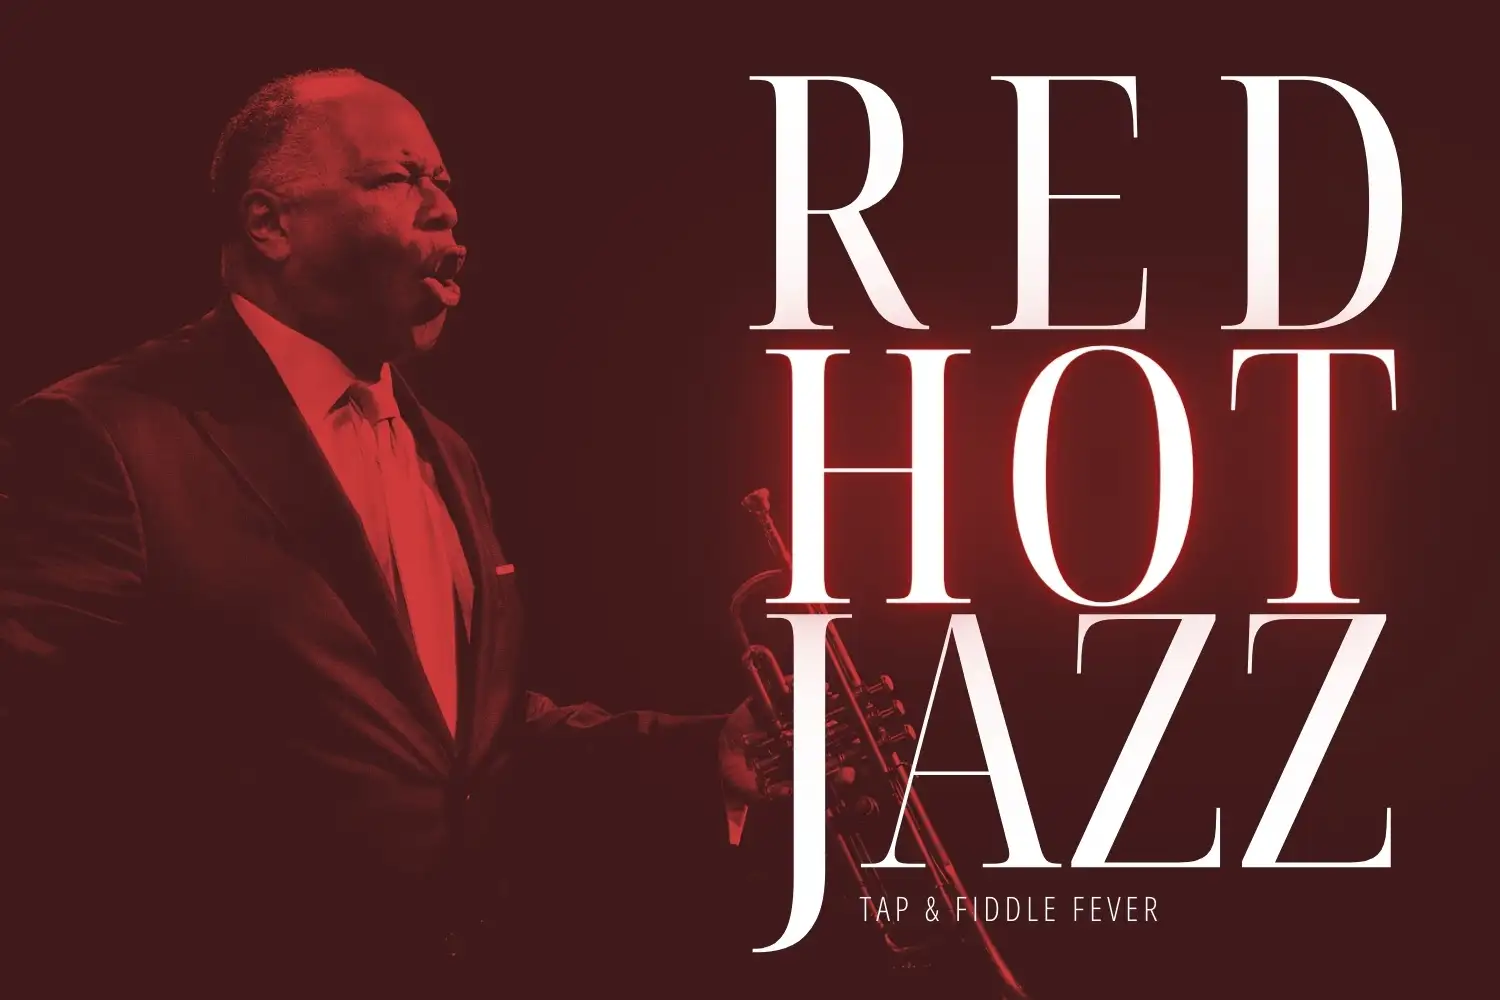 Red Hot Jazz: Tap & Fiddle Fever